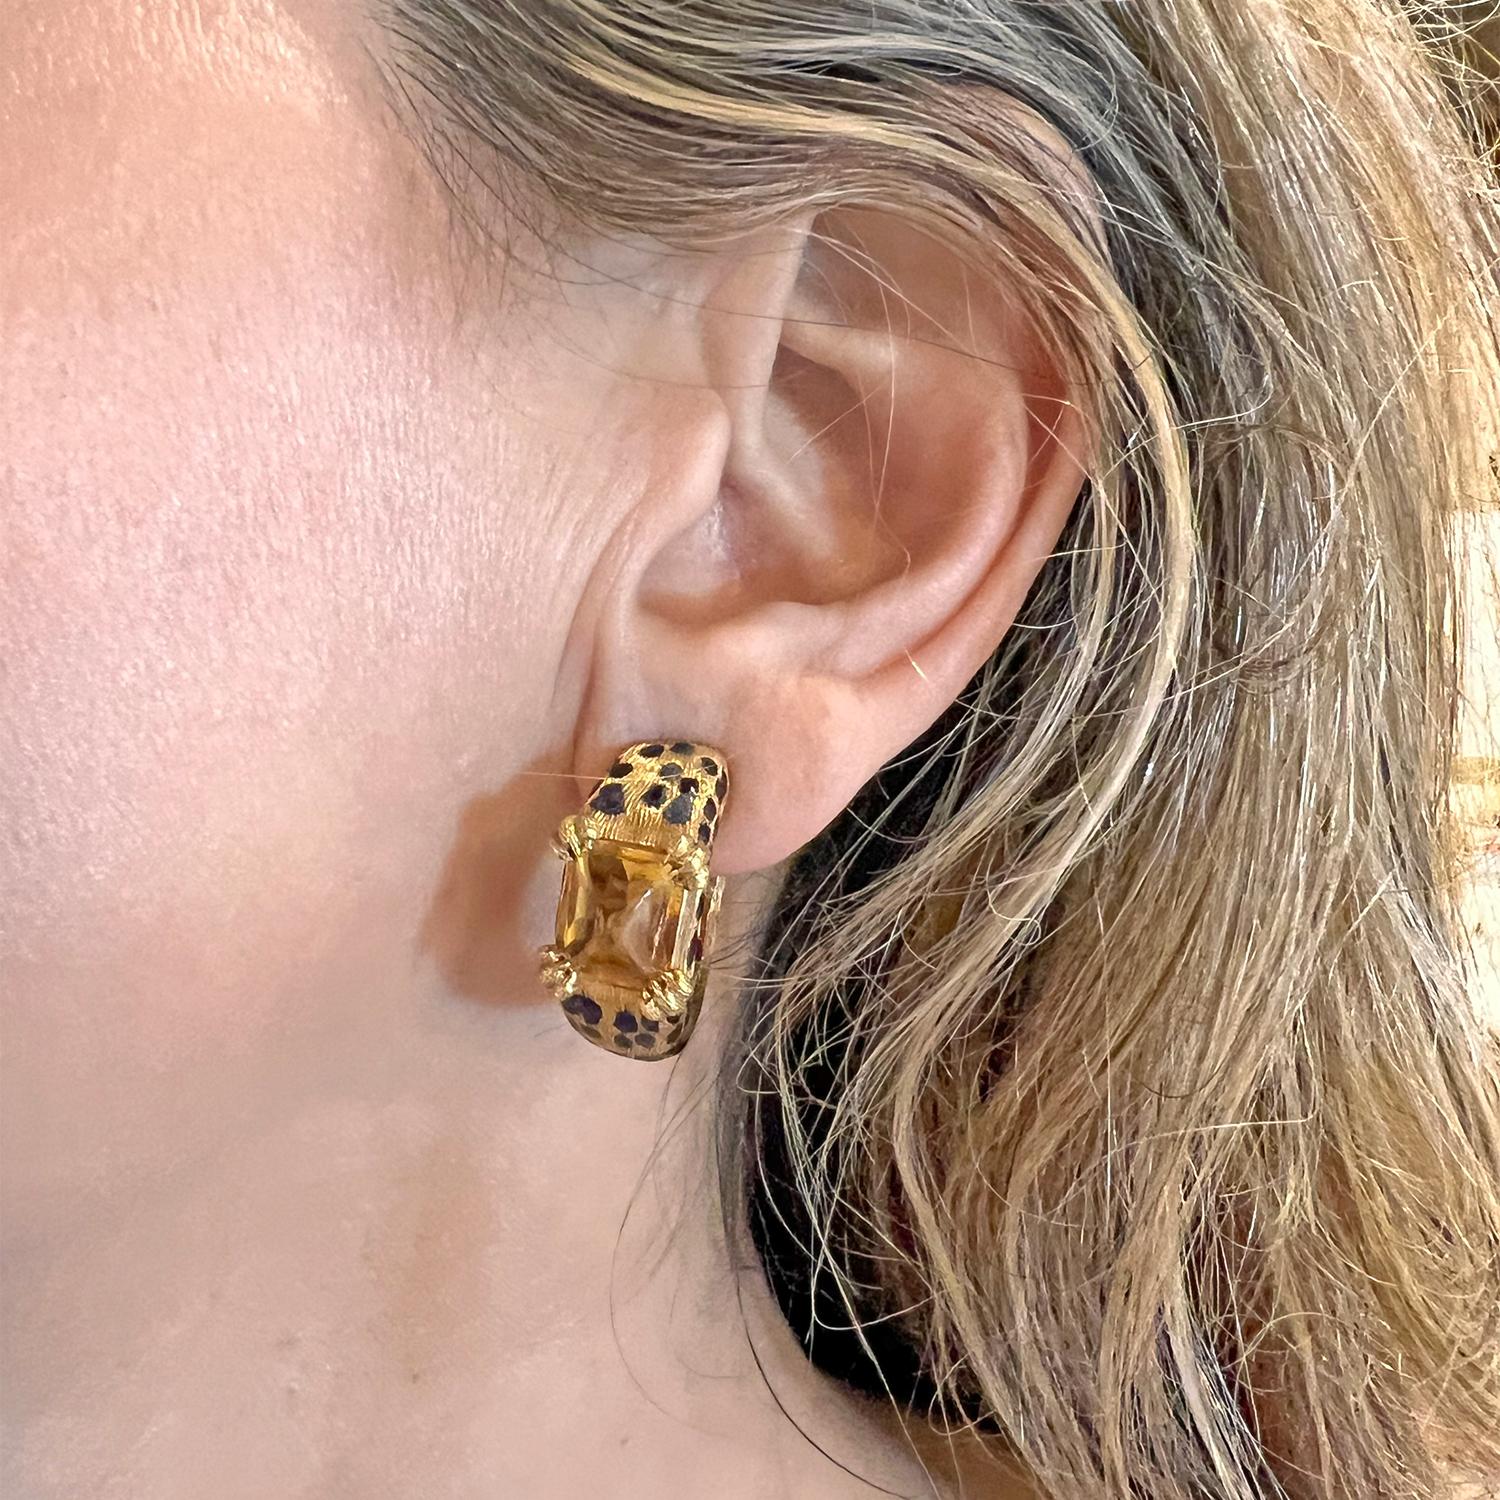 Hoop earrings, each showcasing a sugarloaf cabochon-cut citrine set with leopard paw motif prongs, in textured 18k yellow gold decorated with black enamel leopard spots.  Citrines each measuring approximately 9 x 7mm.  Signed 'Dior' '750' with